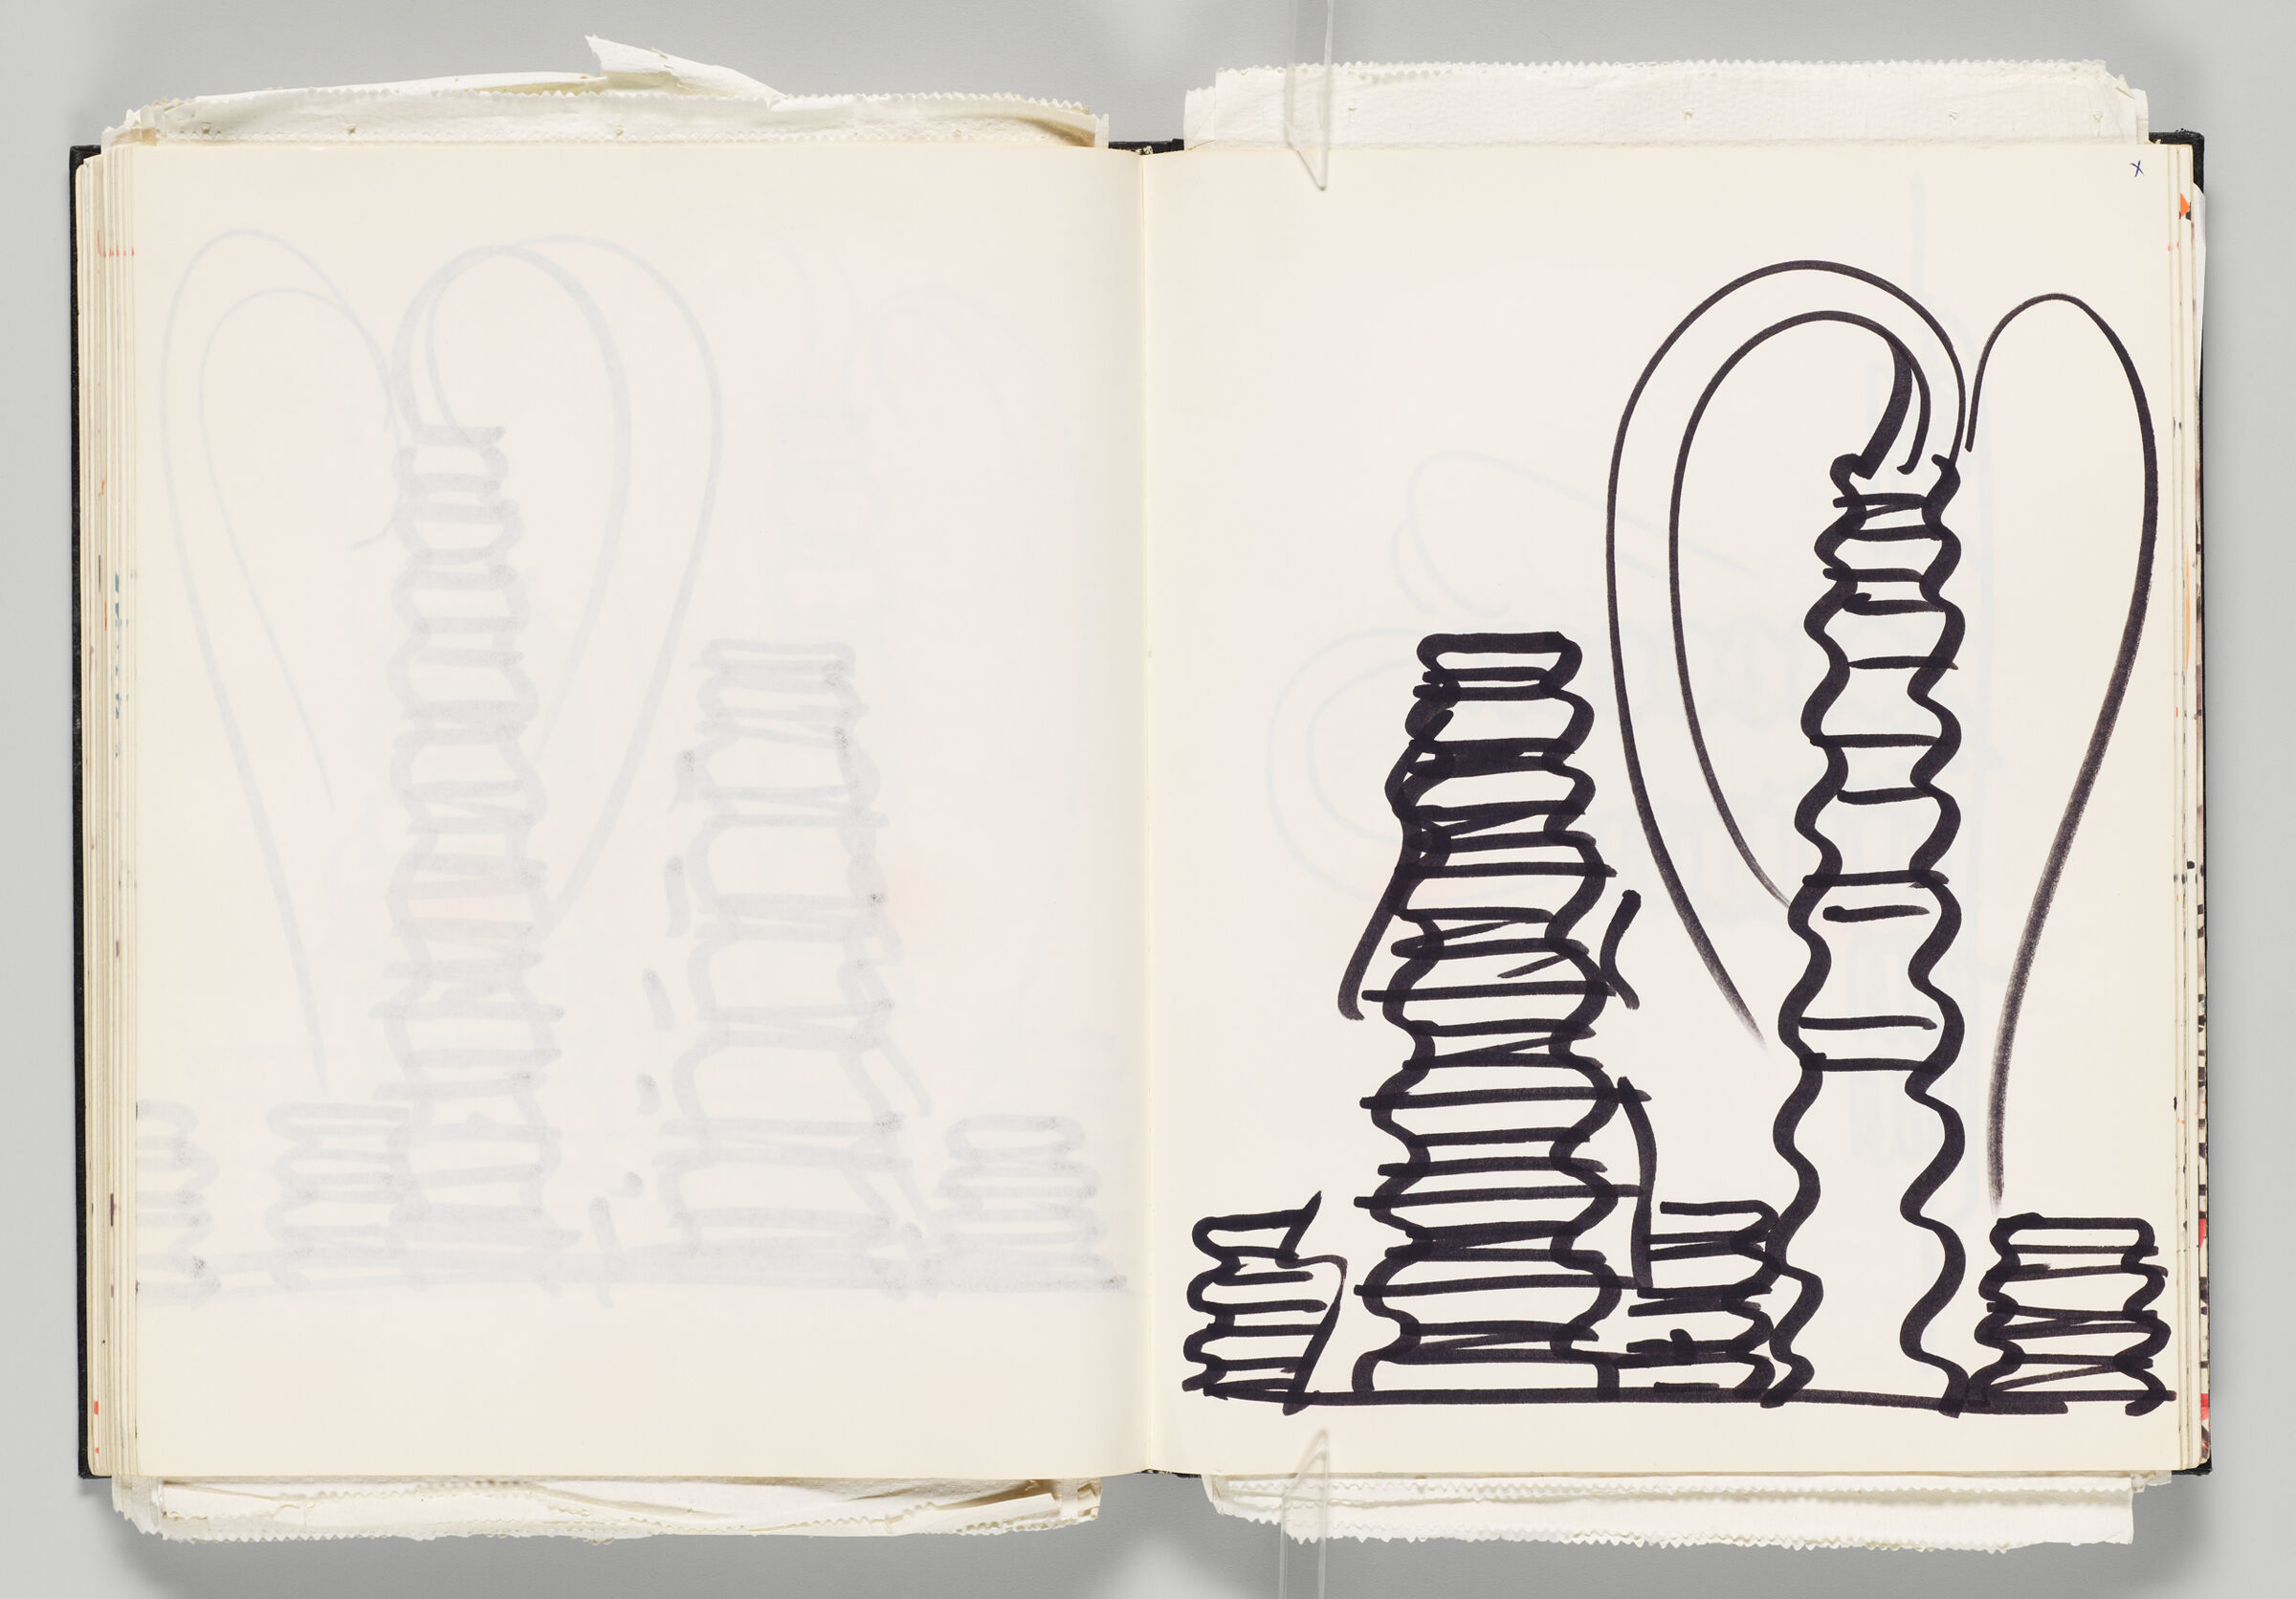 Untitled (Bleed-Through Of Previous Page, Left Page); Untitled (Fountain Designs, Right Page)